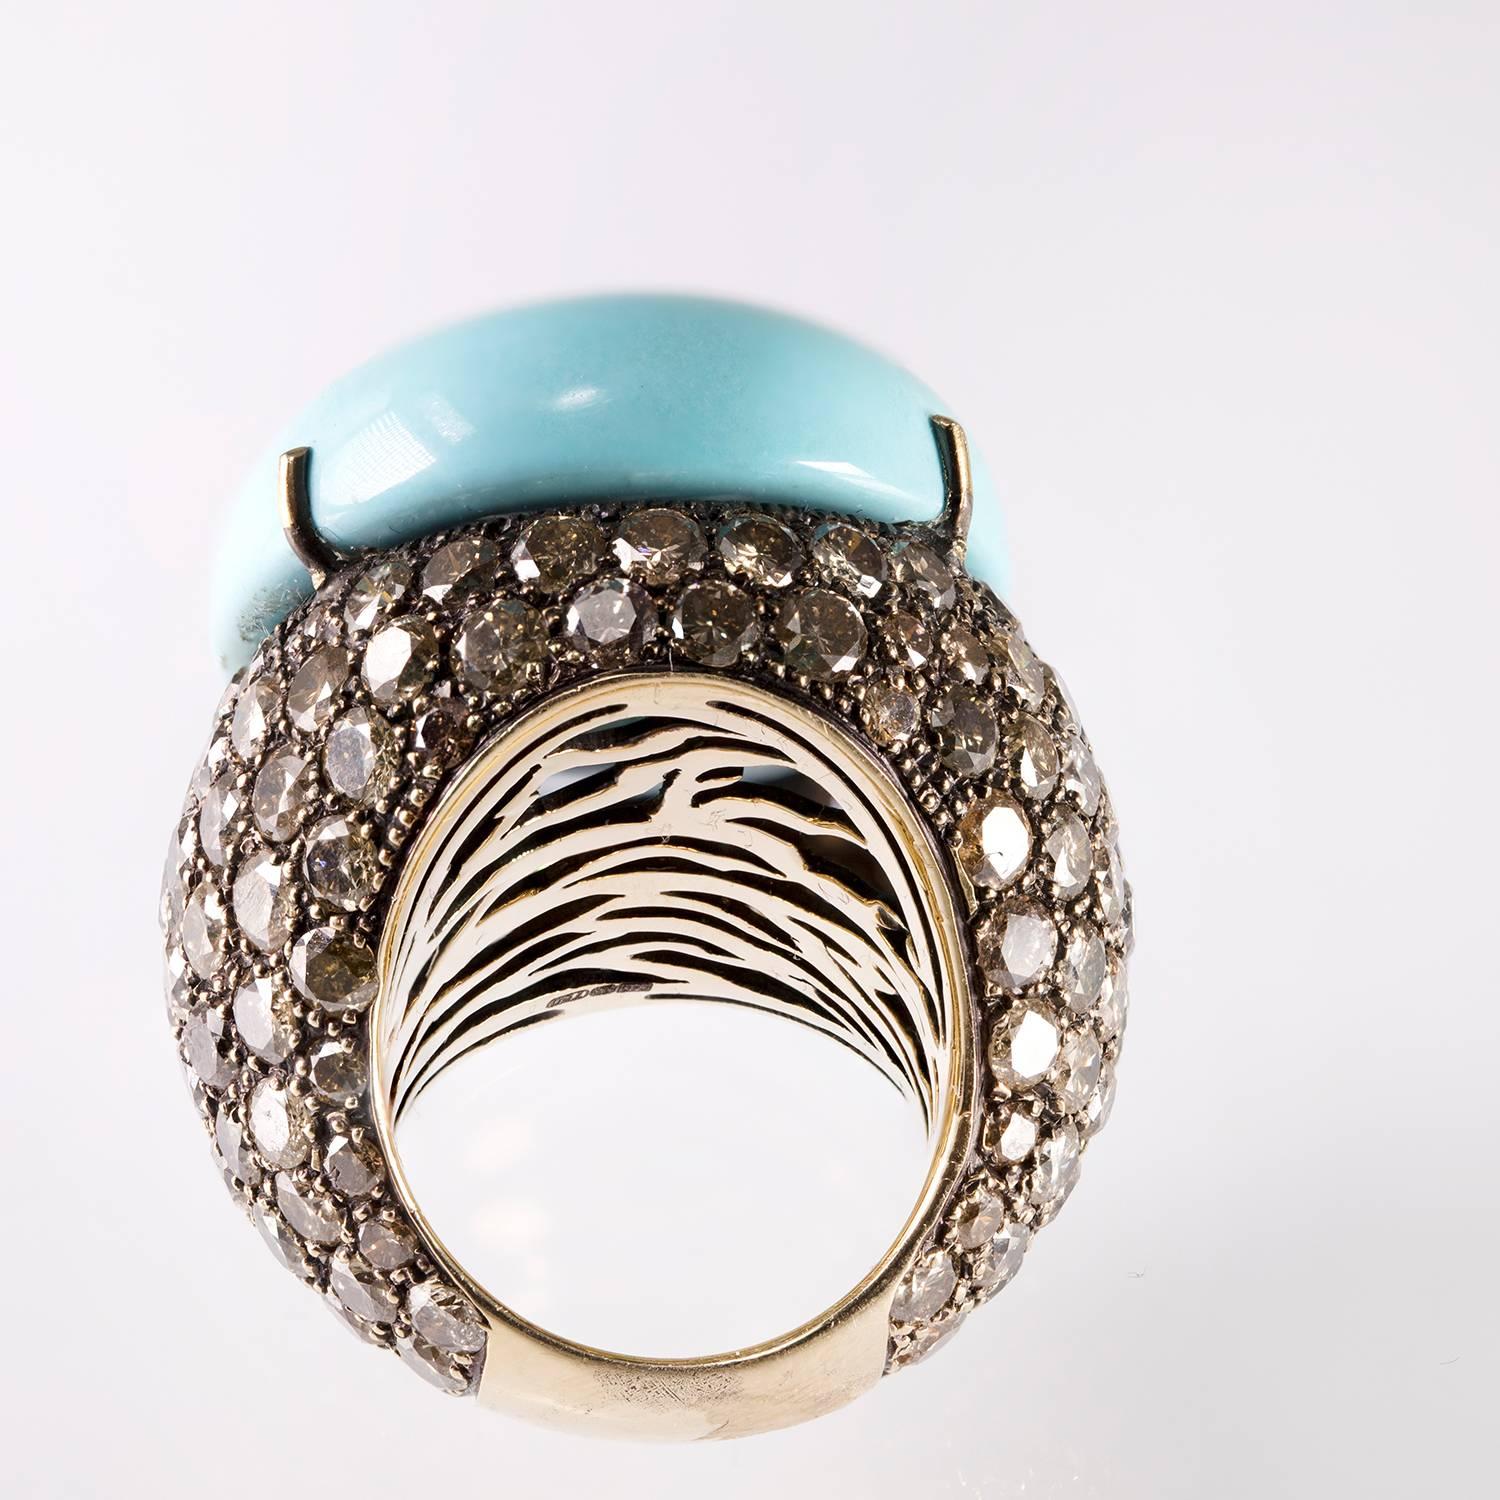 Impressive, One of a Kind, 18kt Champagne Color Gold Dome Ring by Lygia Demades featuring a Natural Even Color Cabochon Turquoise 3.00cm x 2.40cm. The Turquoise is surrounded with Cognac Diamonds of different sizes, 12.75ct total weight Brown/Cognac